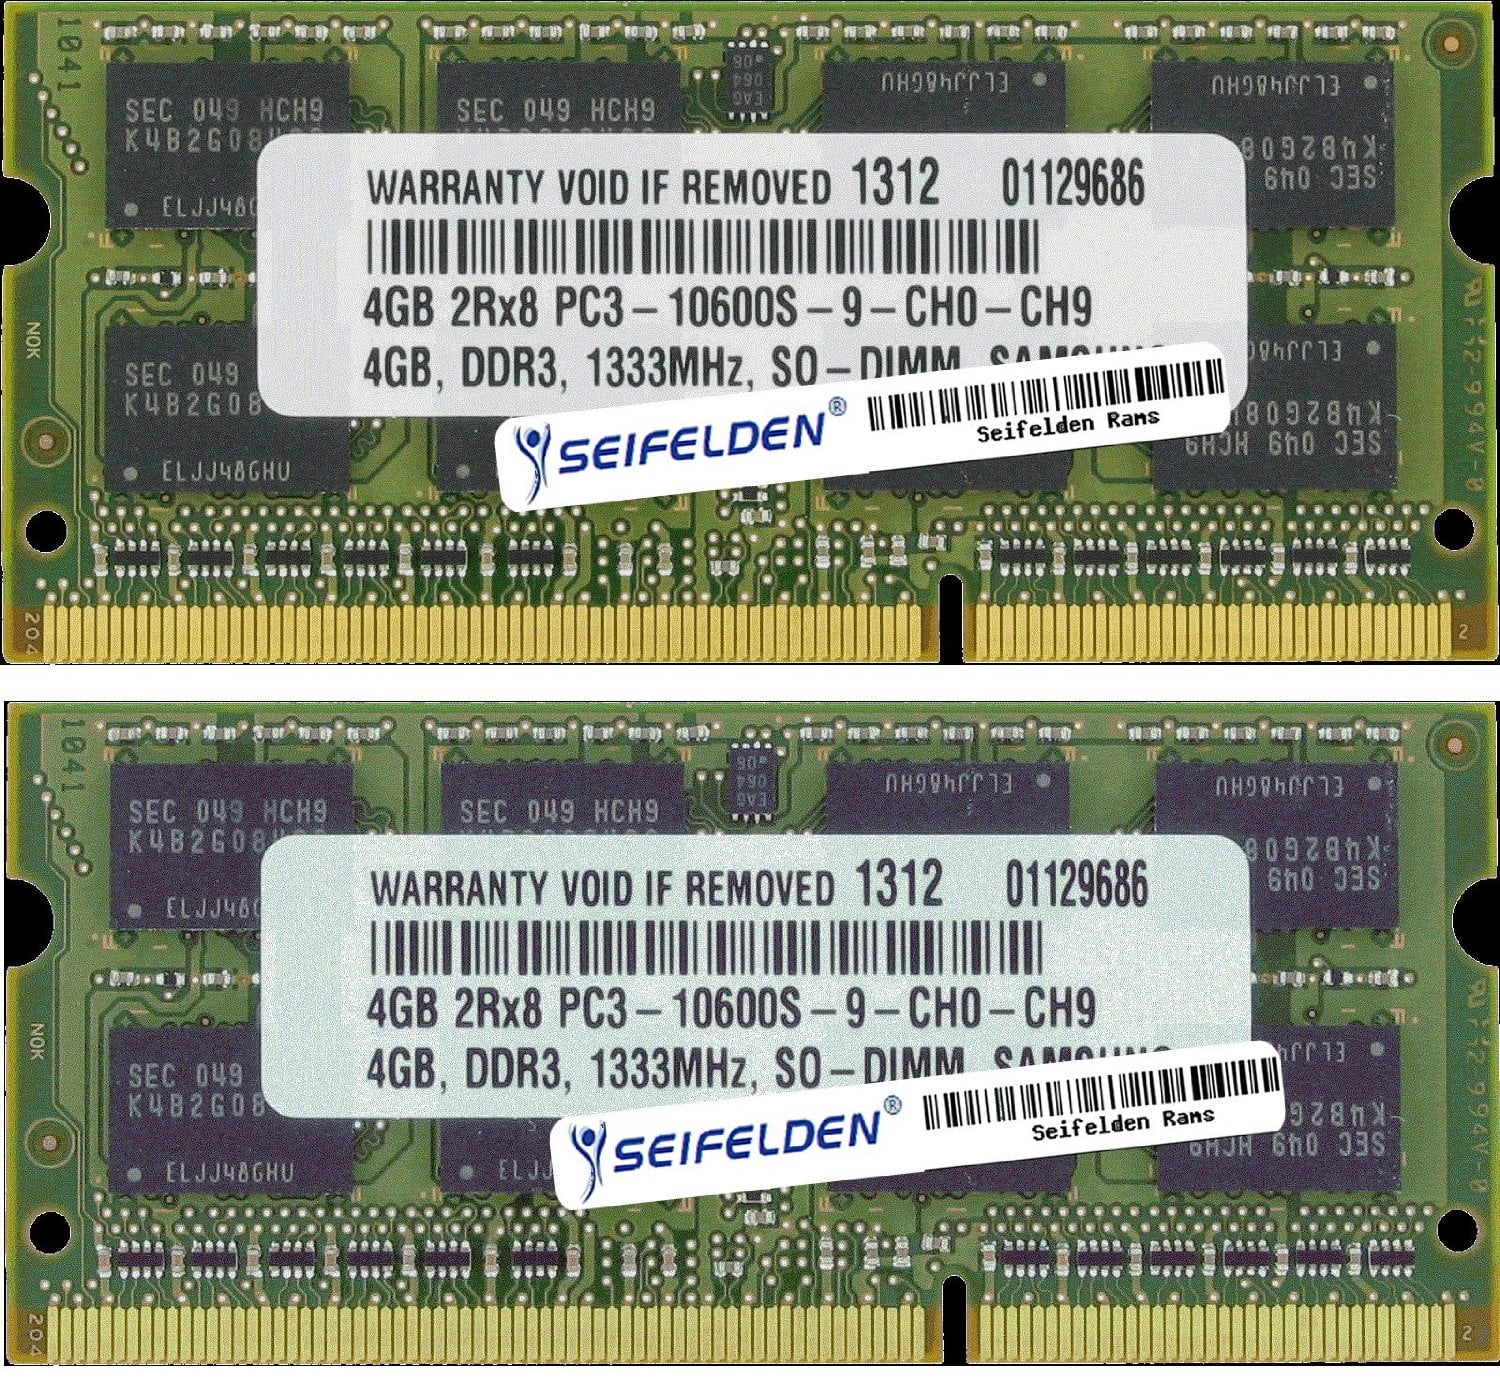 PARTS-QUICK Brand 4GB Memory for Toshiba Satellite A505-S6033 DDR3 PC3-8500 RAM Upgrade